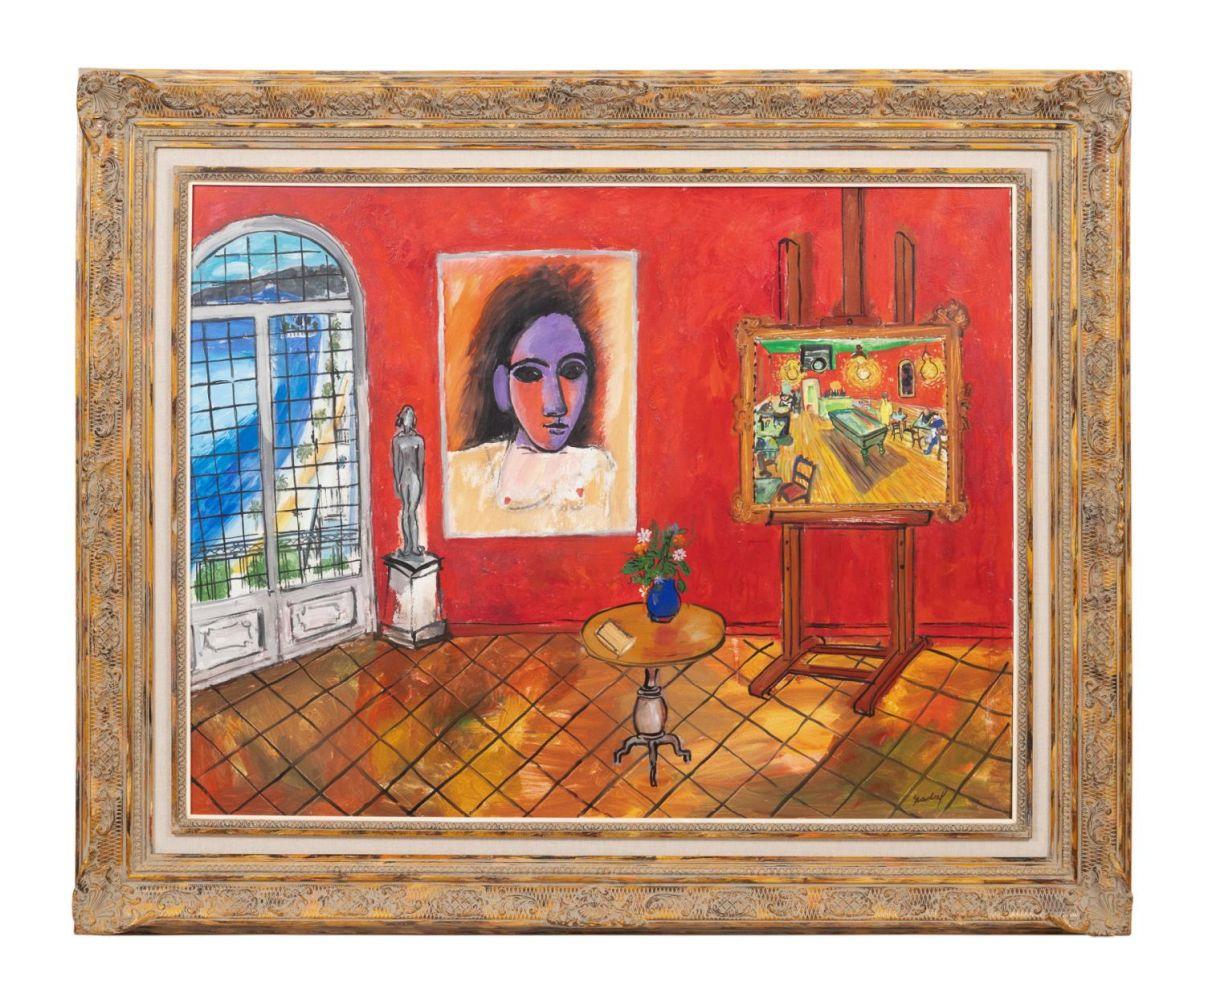 Oil on canvas painting by Carlos Nadal (French, 1917-1998), titled Salon Rojo, signed lower left and titled, signed and dated to verso, one of several works by Nadal in the auction ($9,075).